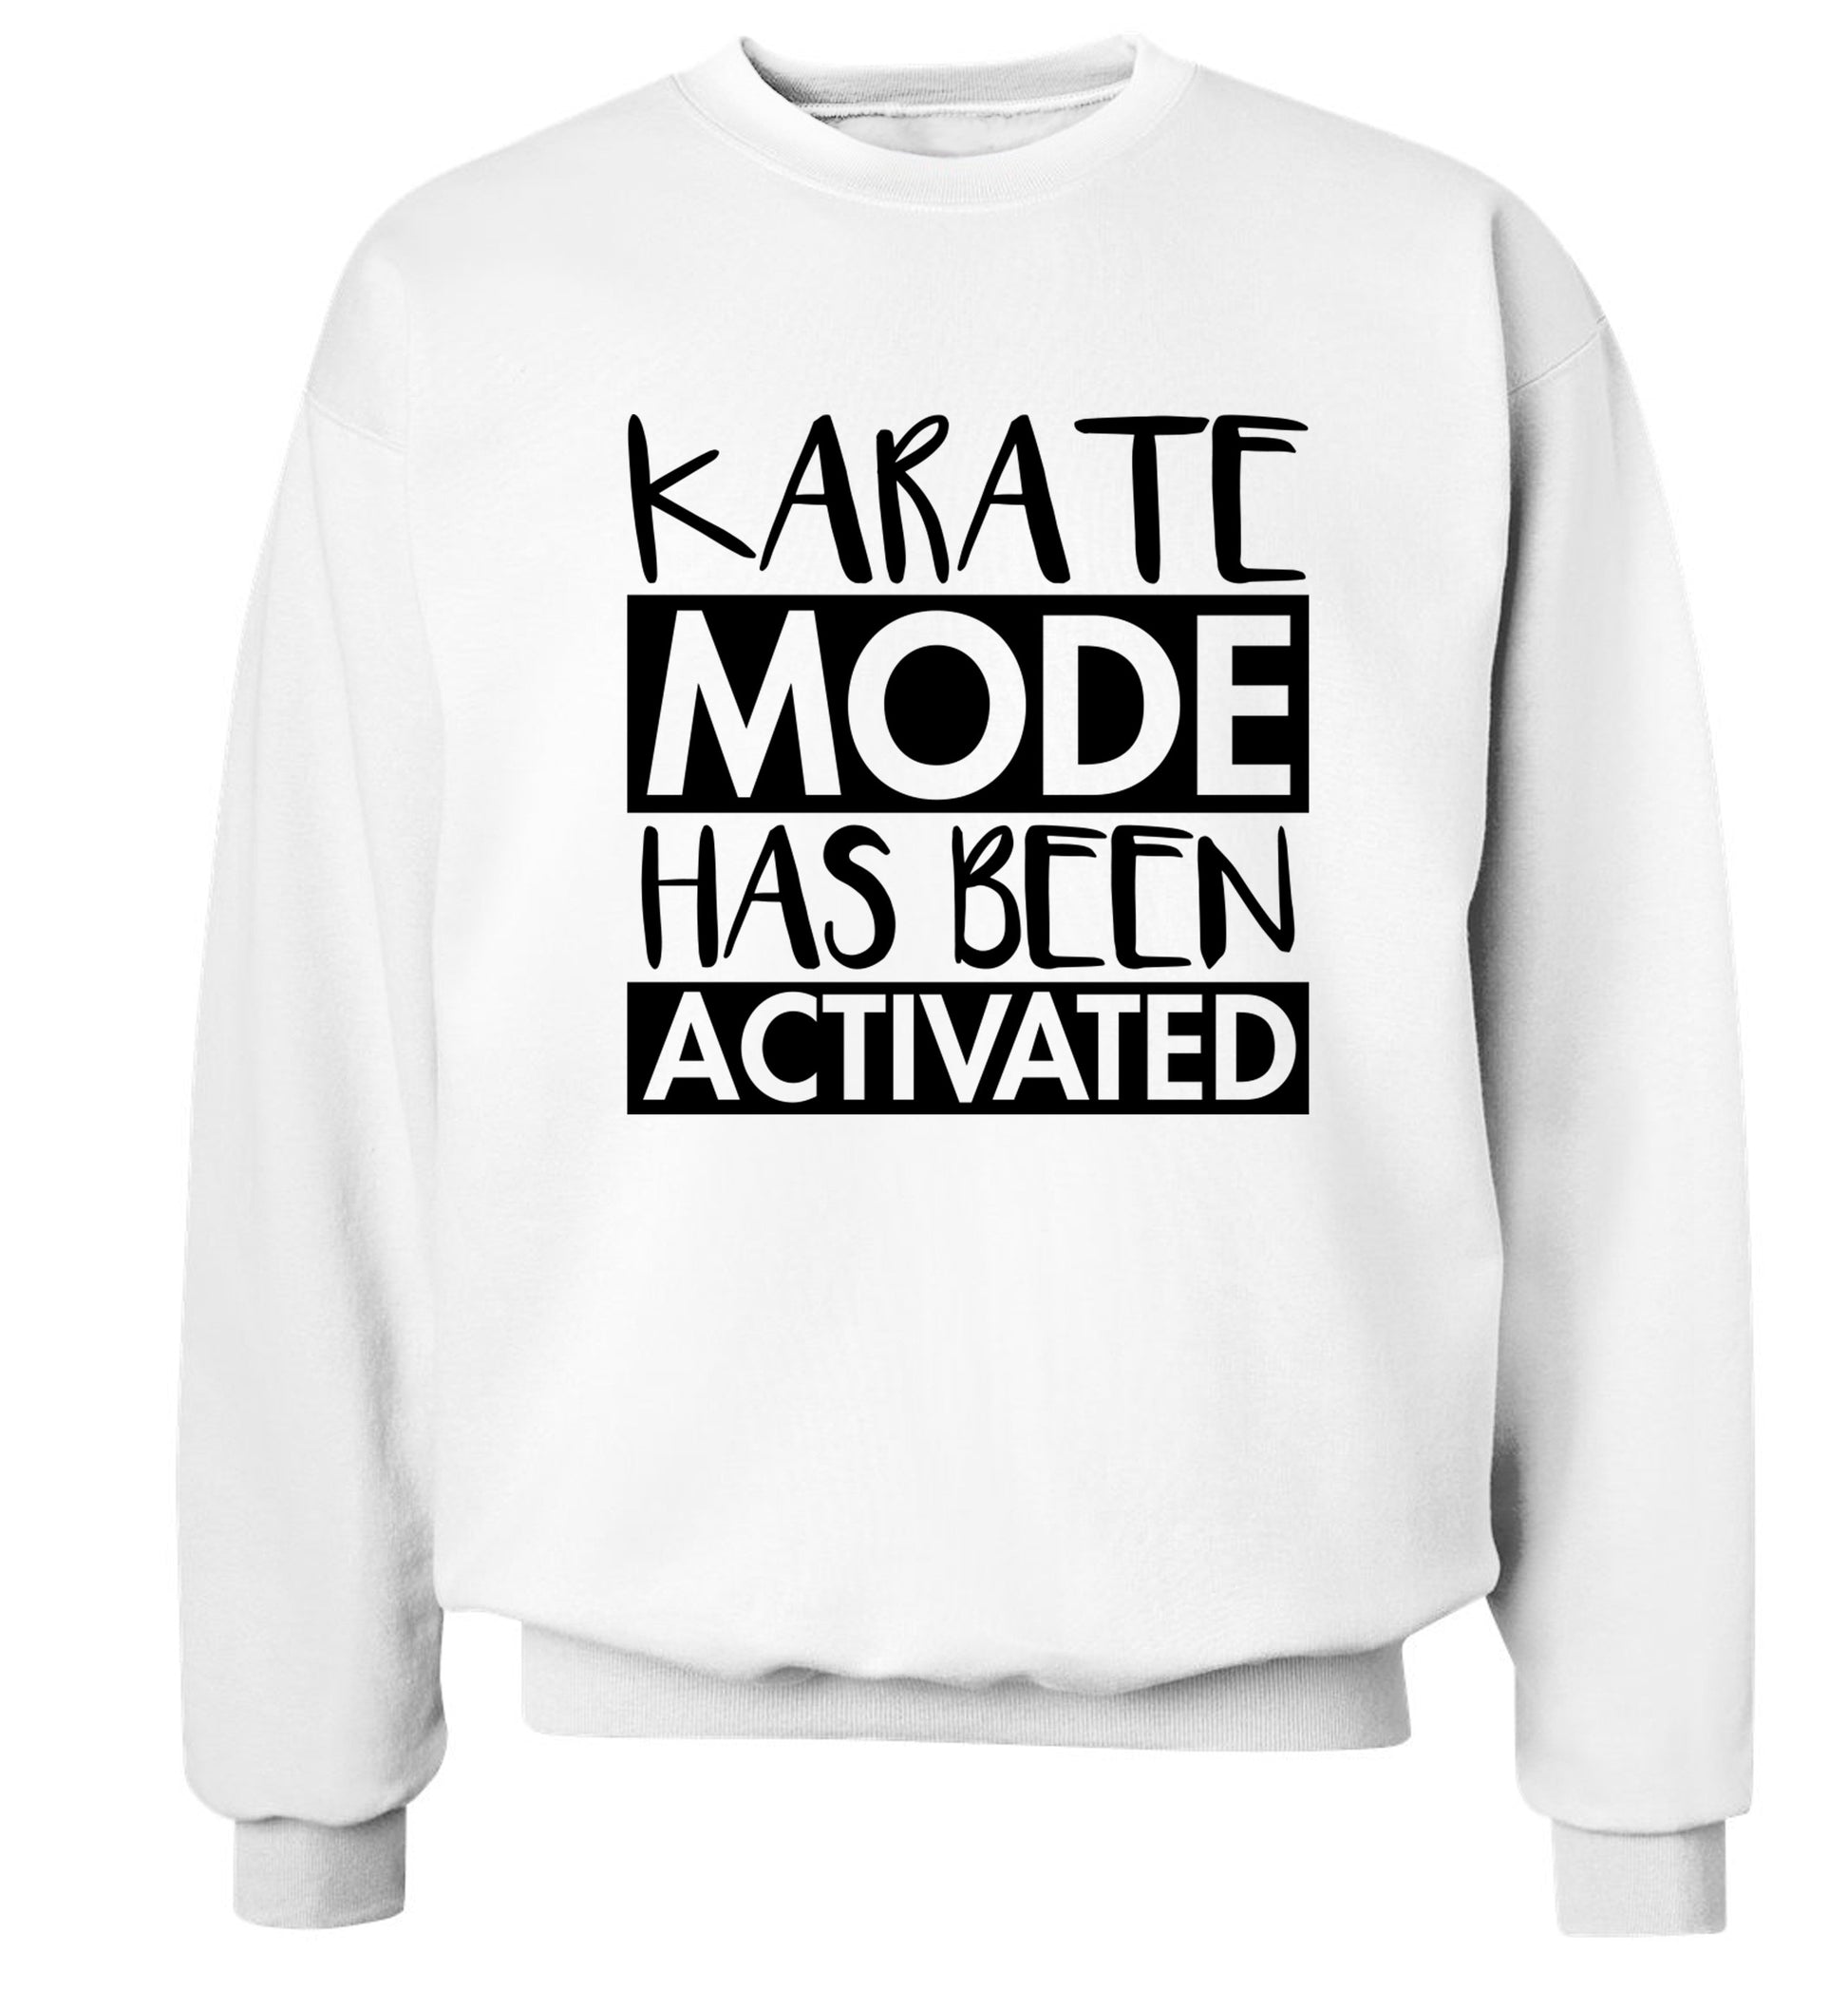 Karate mode activated Adult's unisex white Sweater 2XL